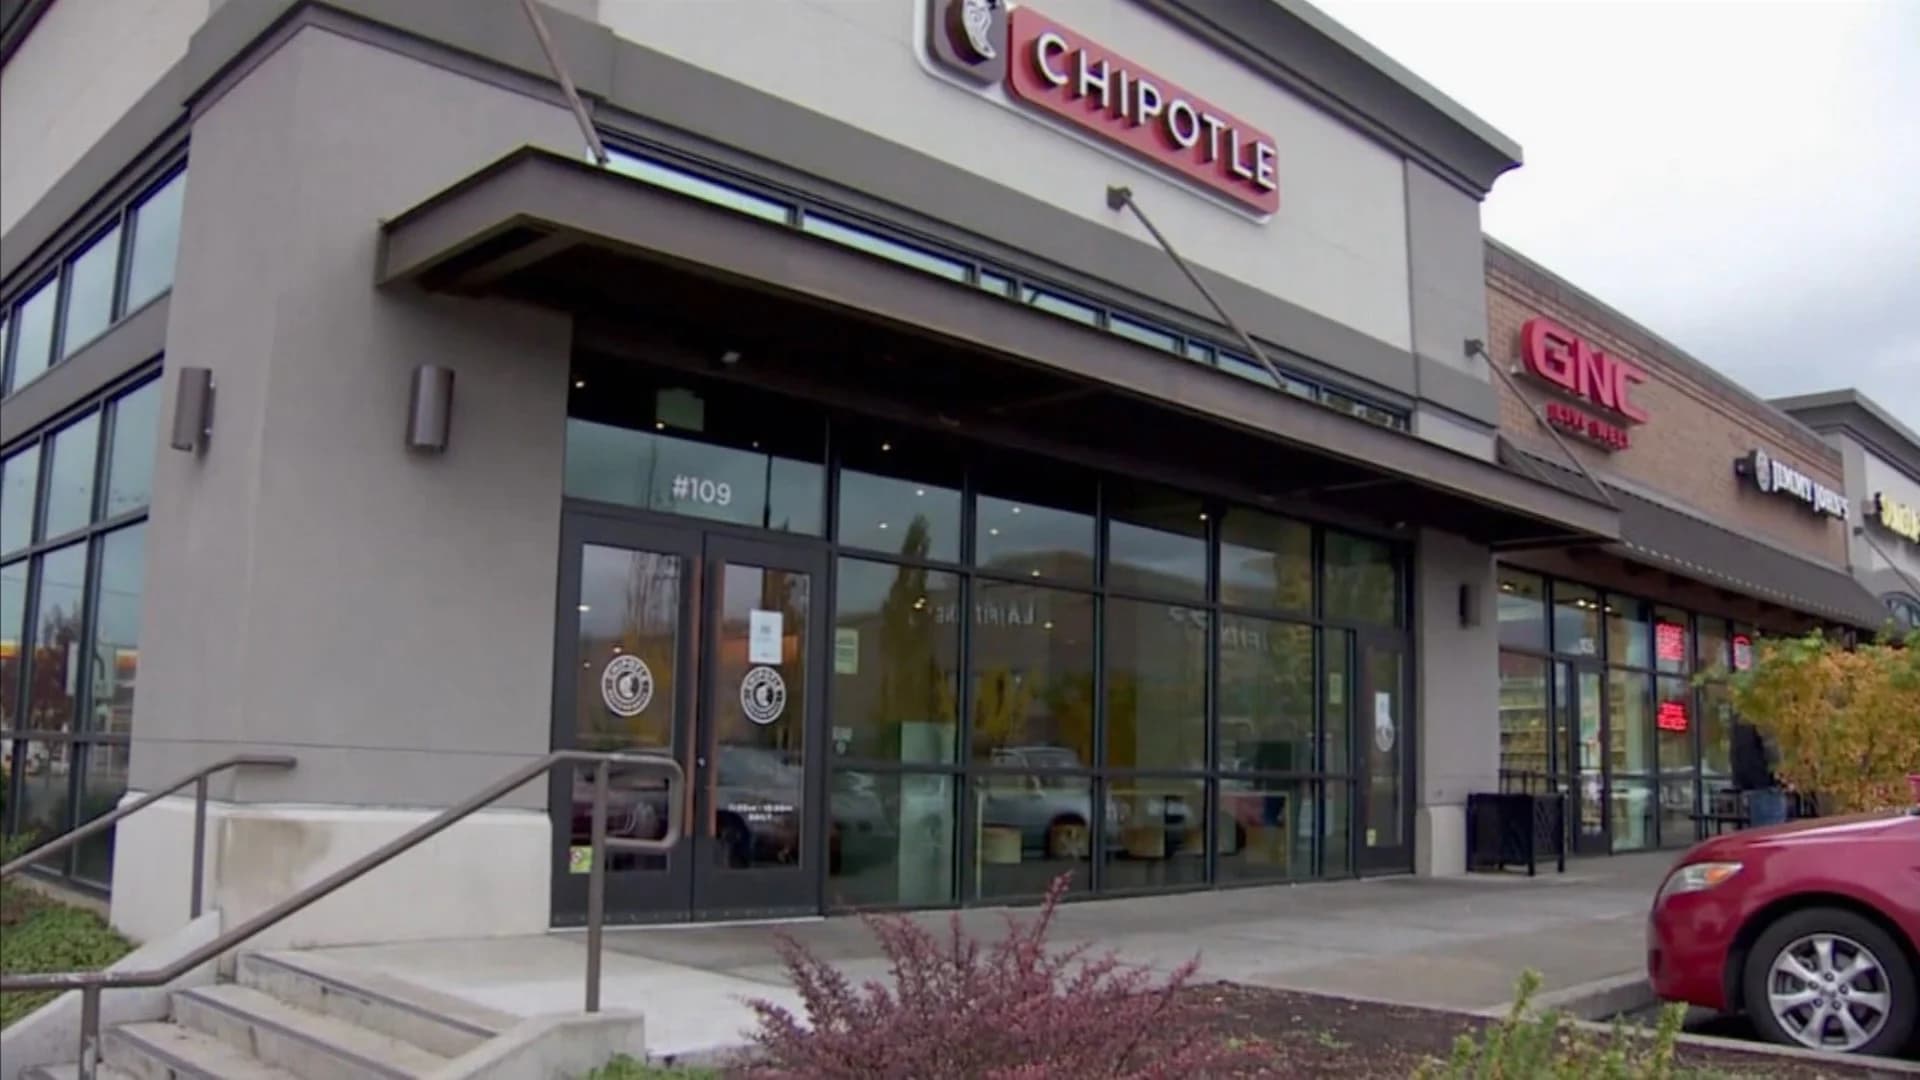 Chipotle offering buy one, get one deal for hockey fan customers